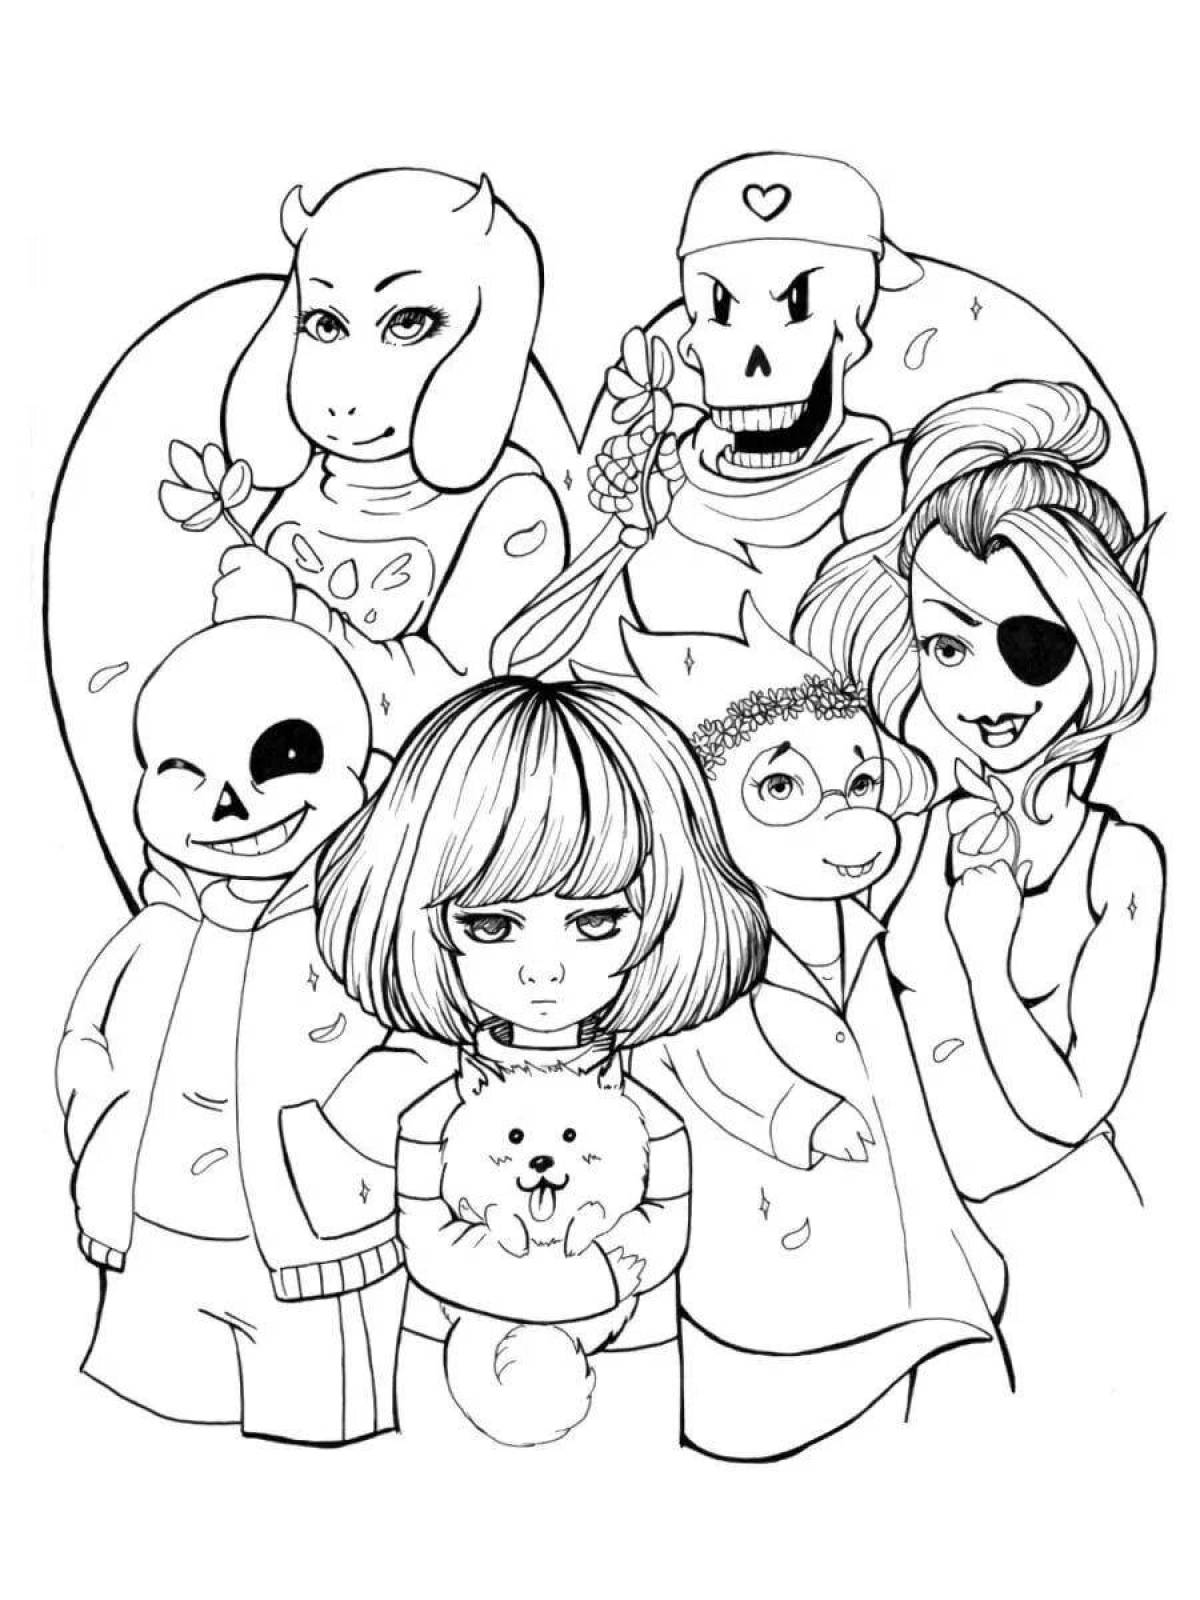 Undertale stylish coloring book